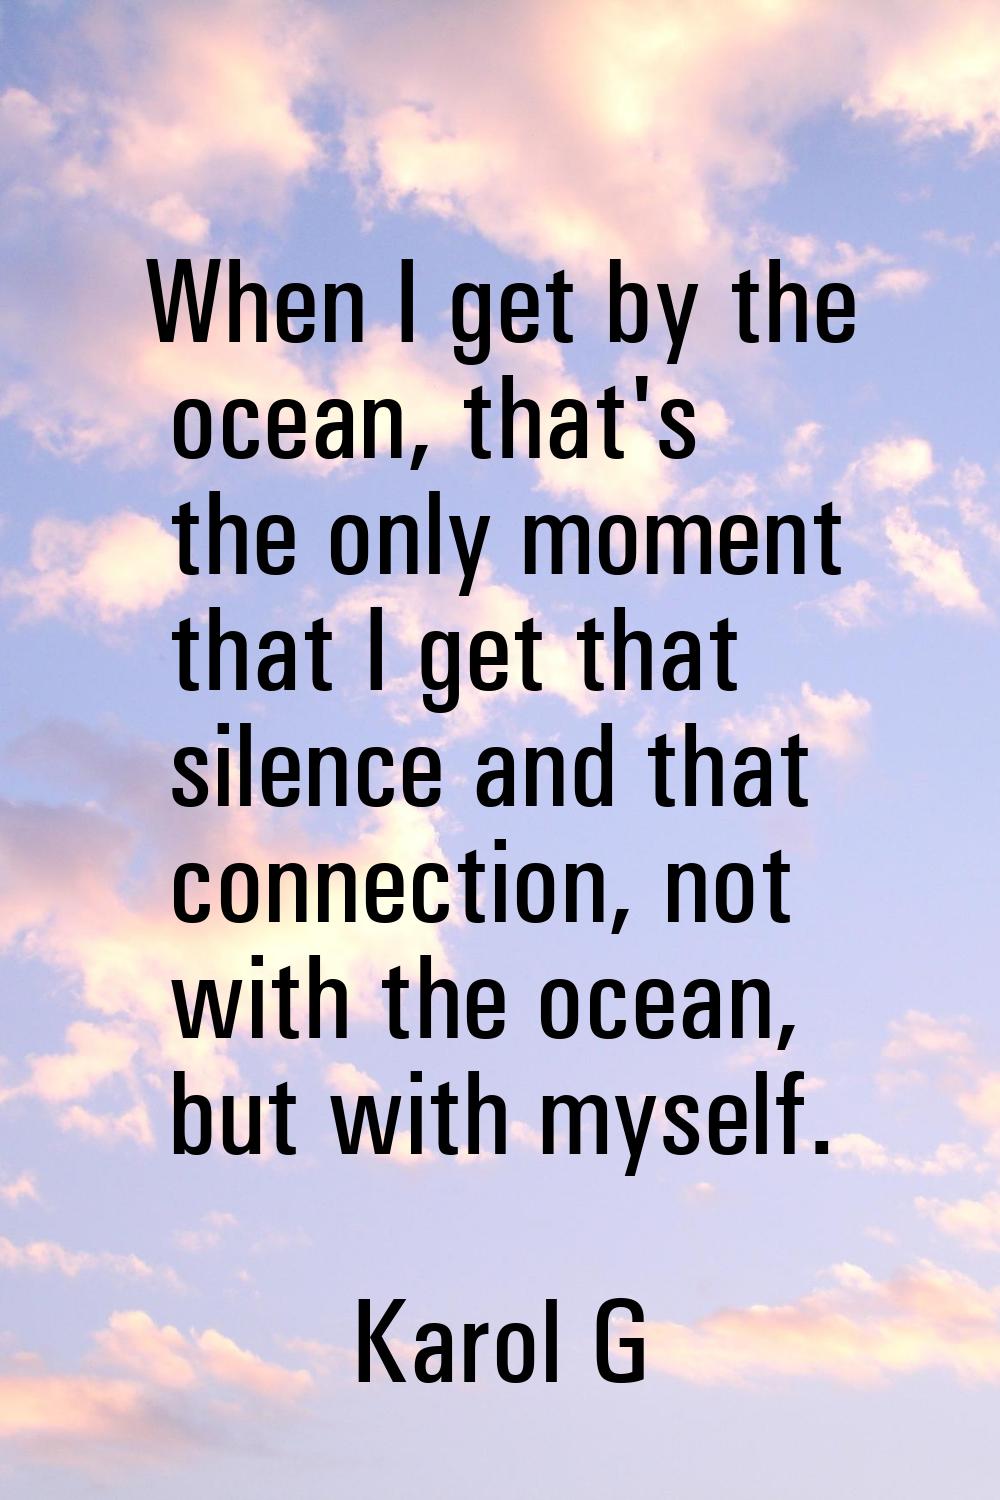 When I get by the ocean, that's the only moment that I get that silence and that connection, not wi